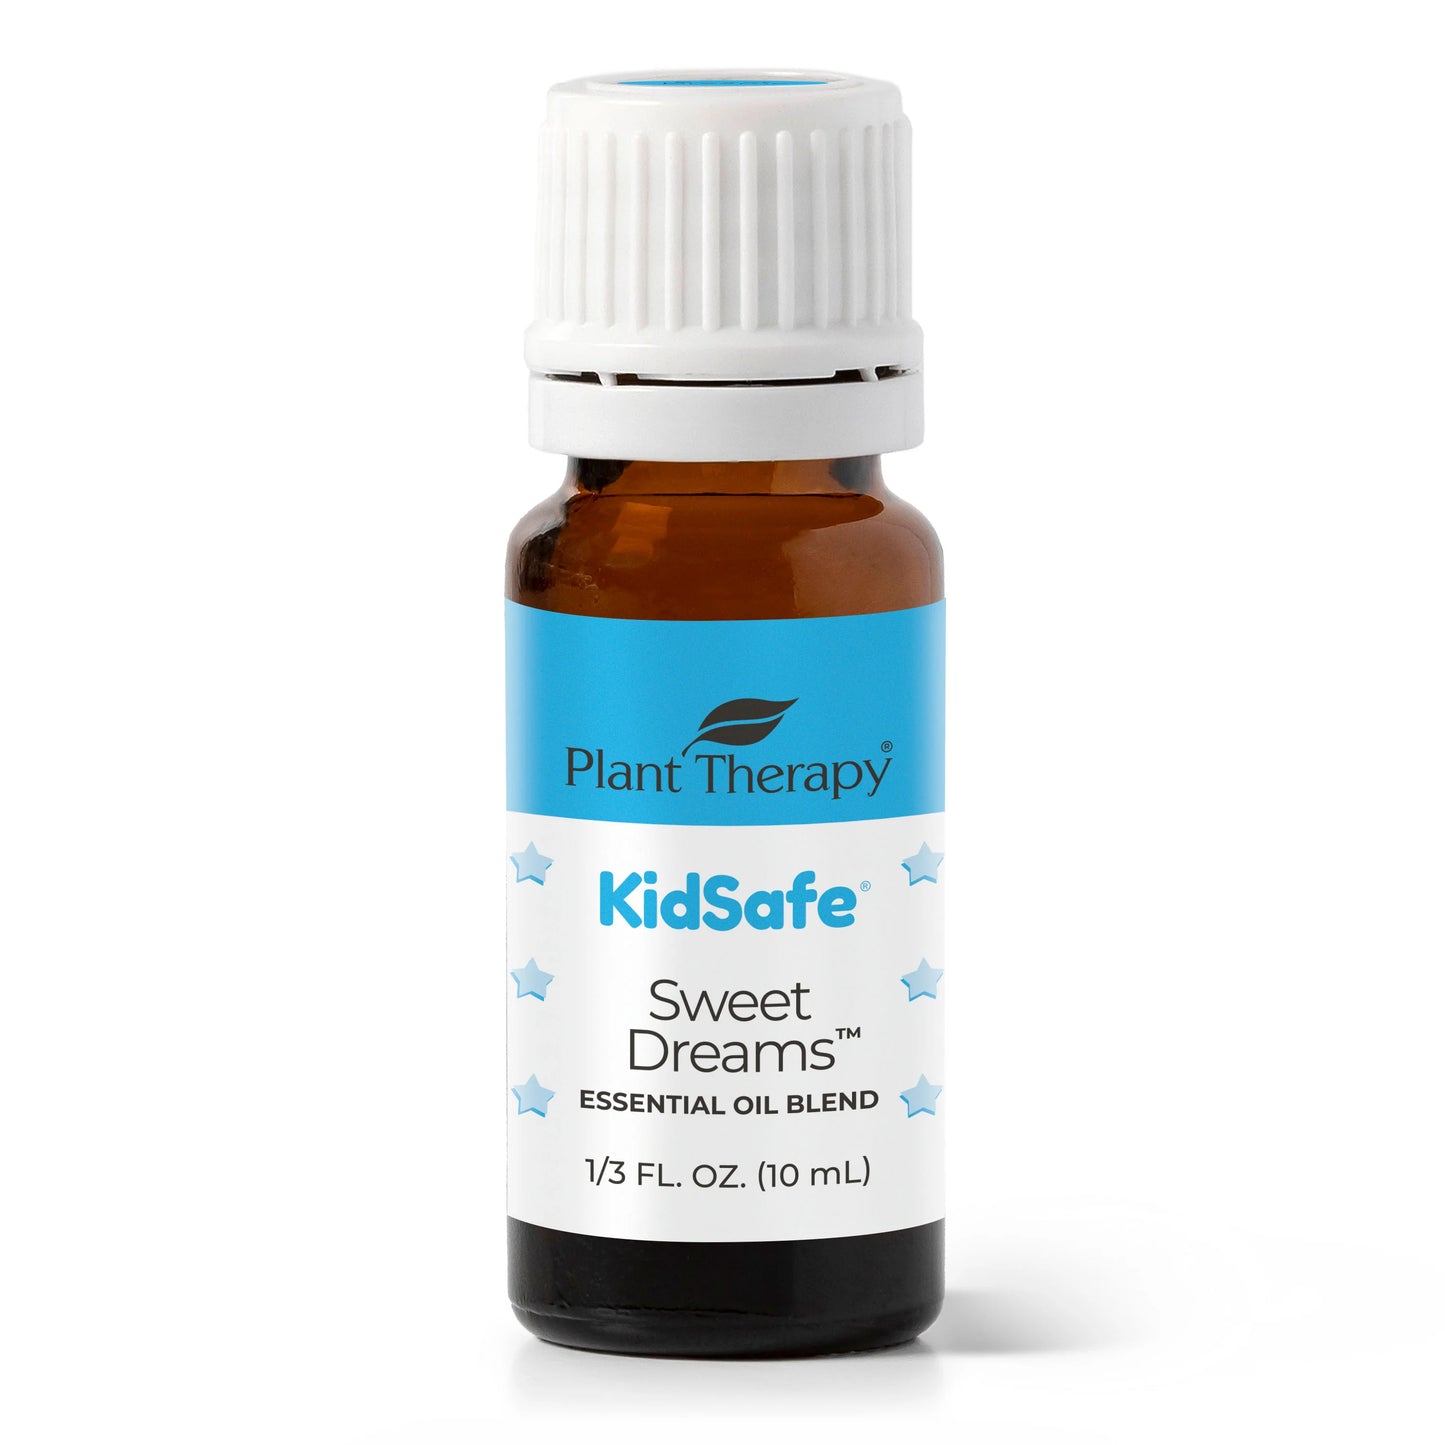 Plant Therapy 10mL Kid Safe Essential Oil Blends